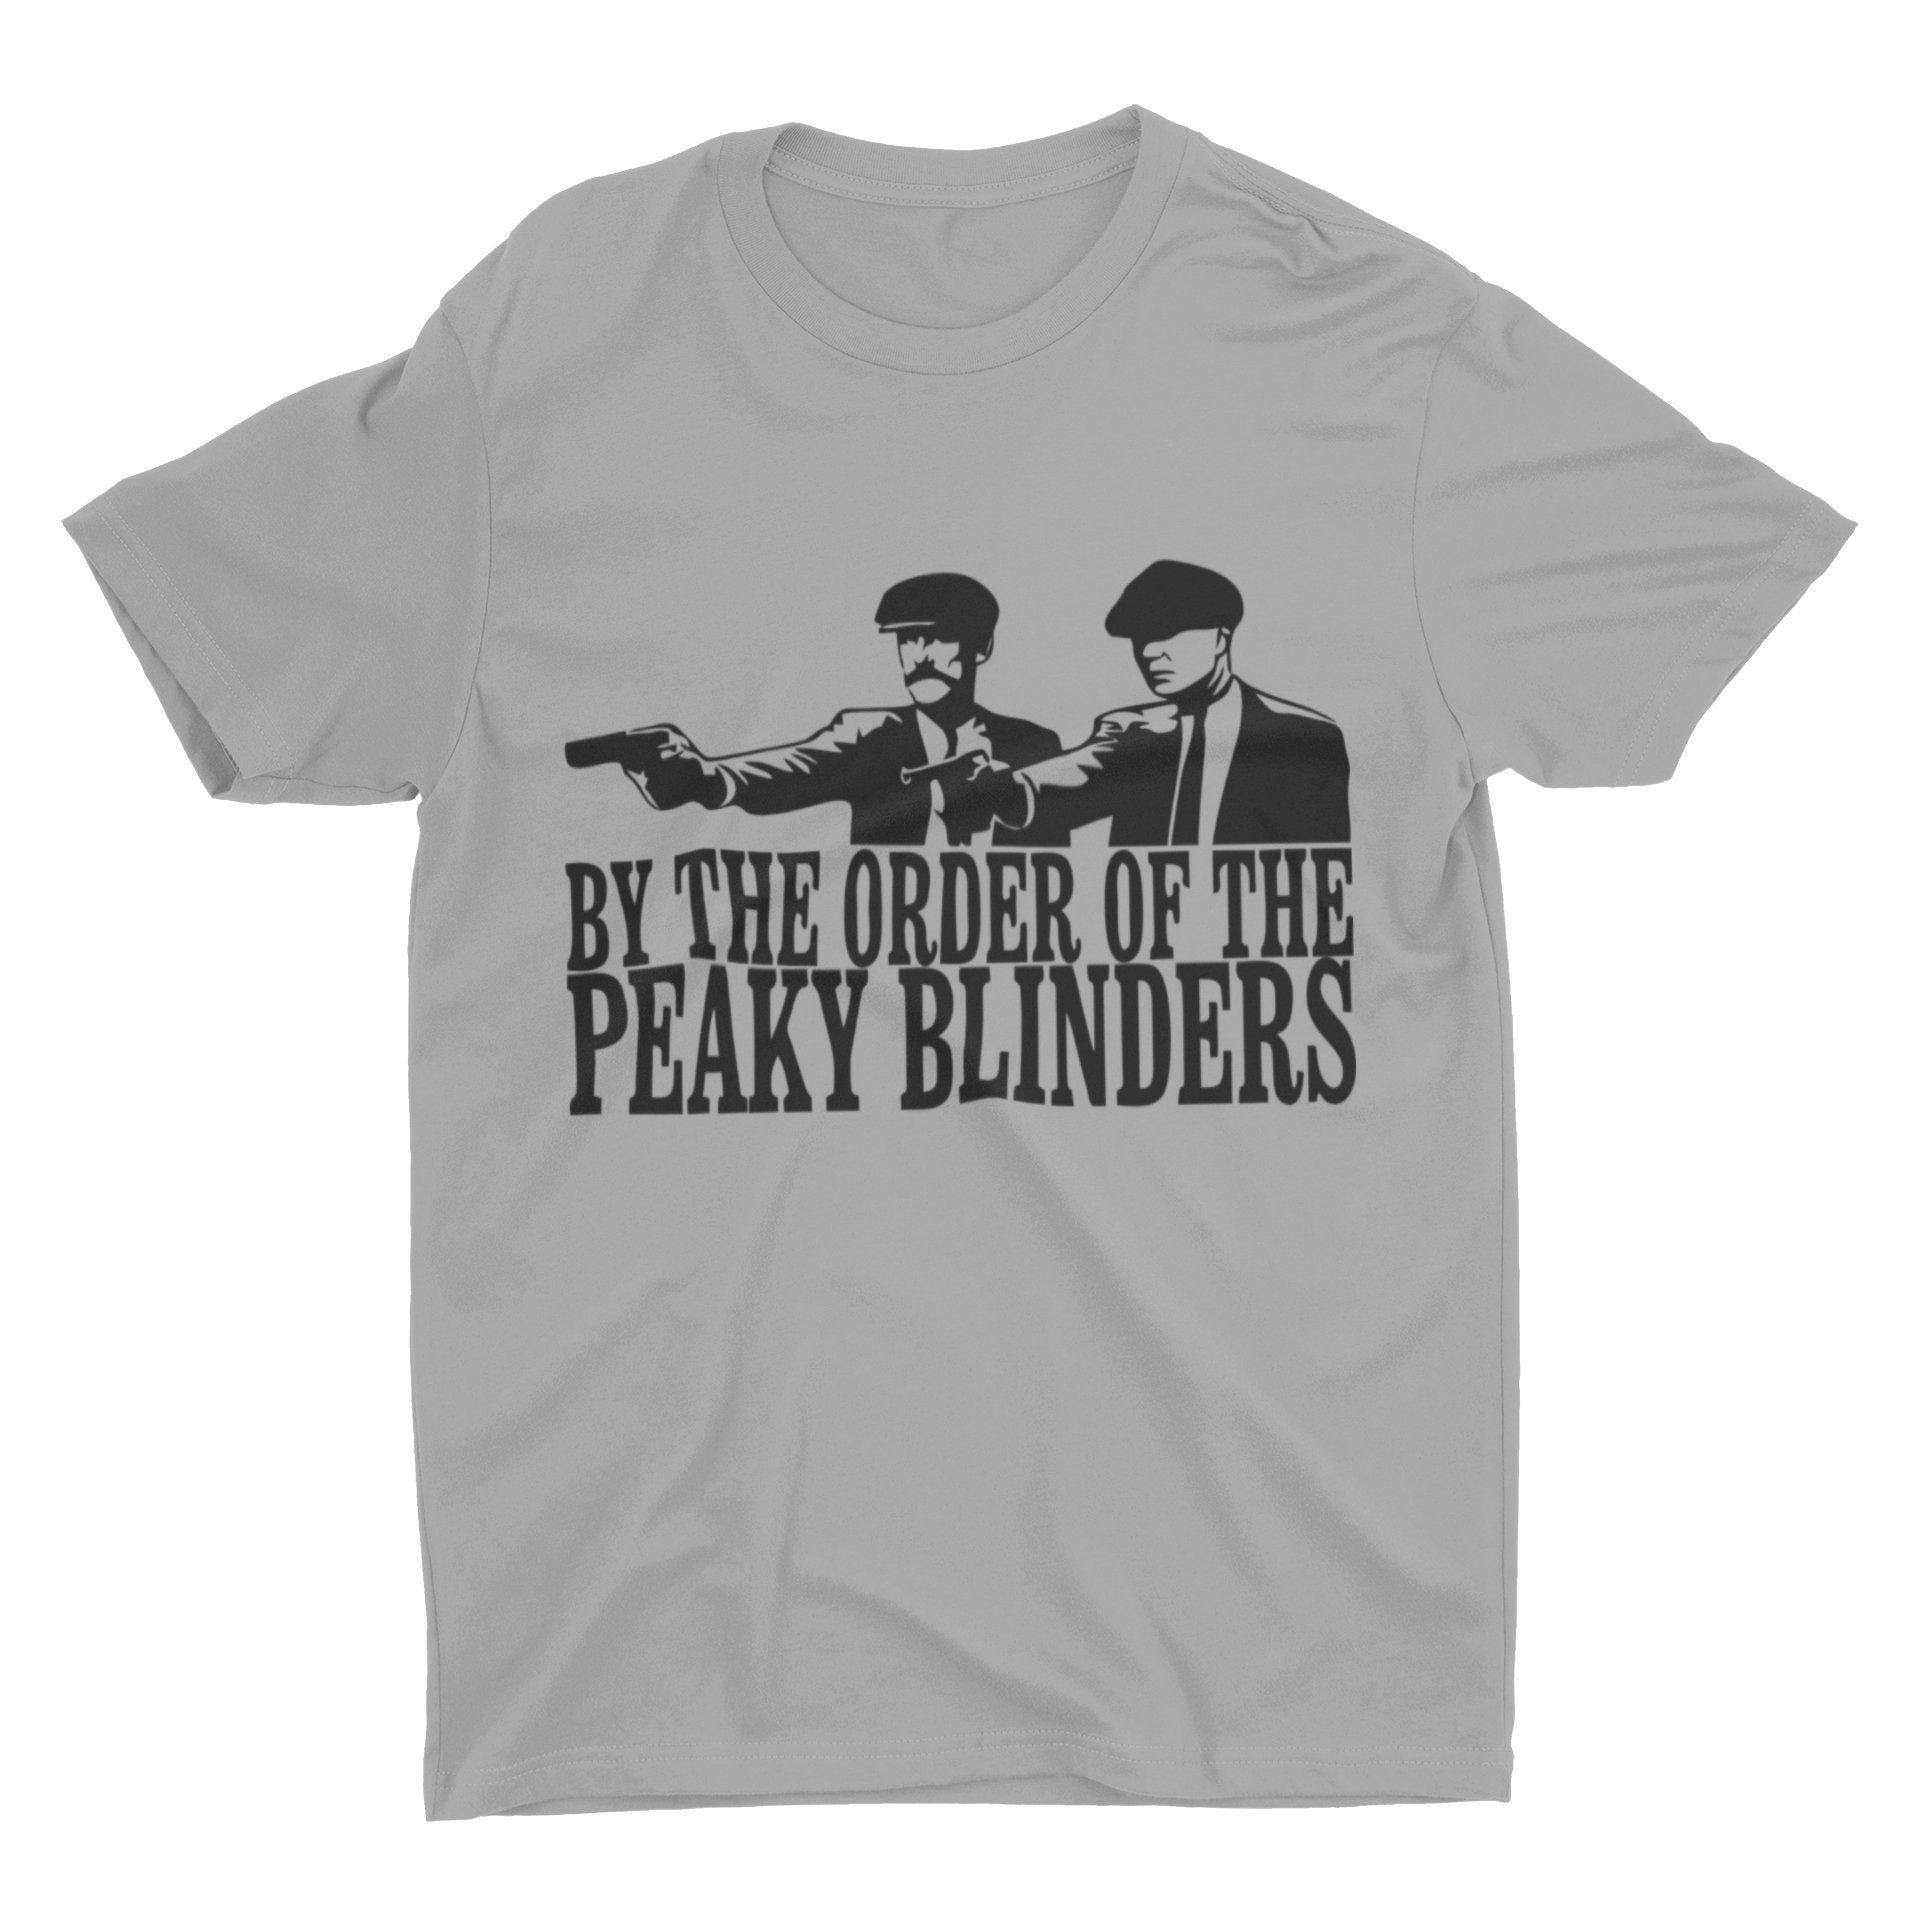 thelegalgang,By Order of the Peaky Blinders Quote T-shirt,.